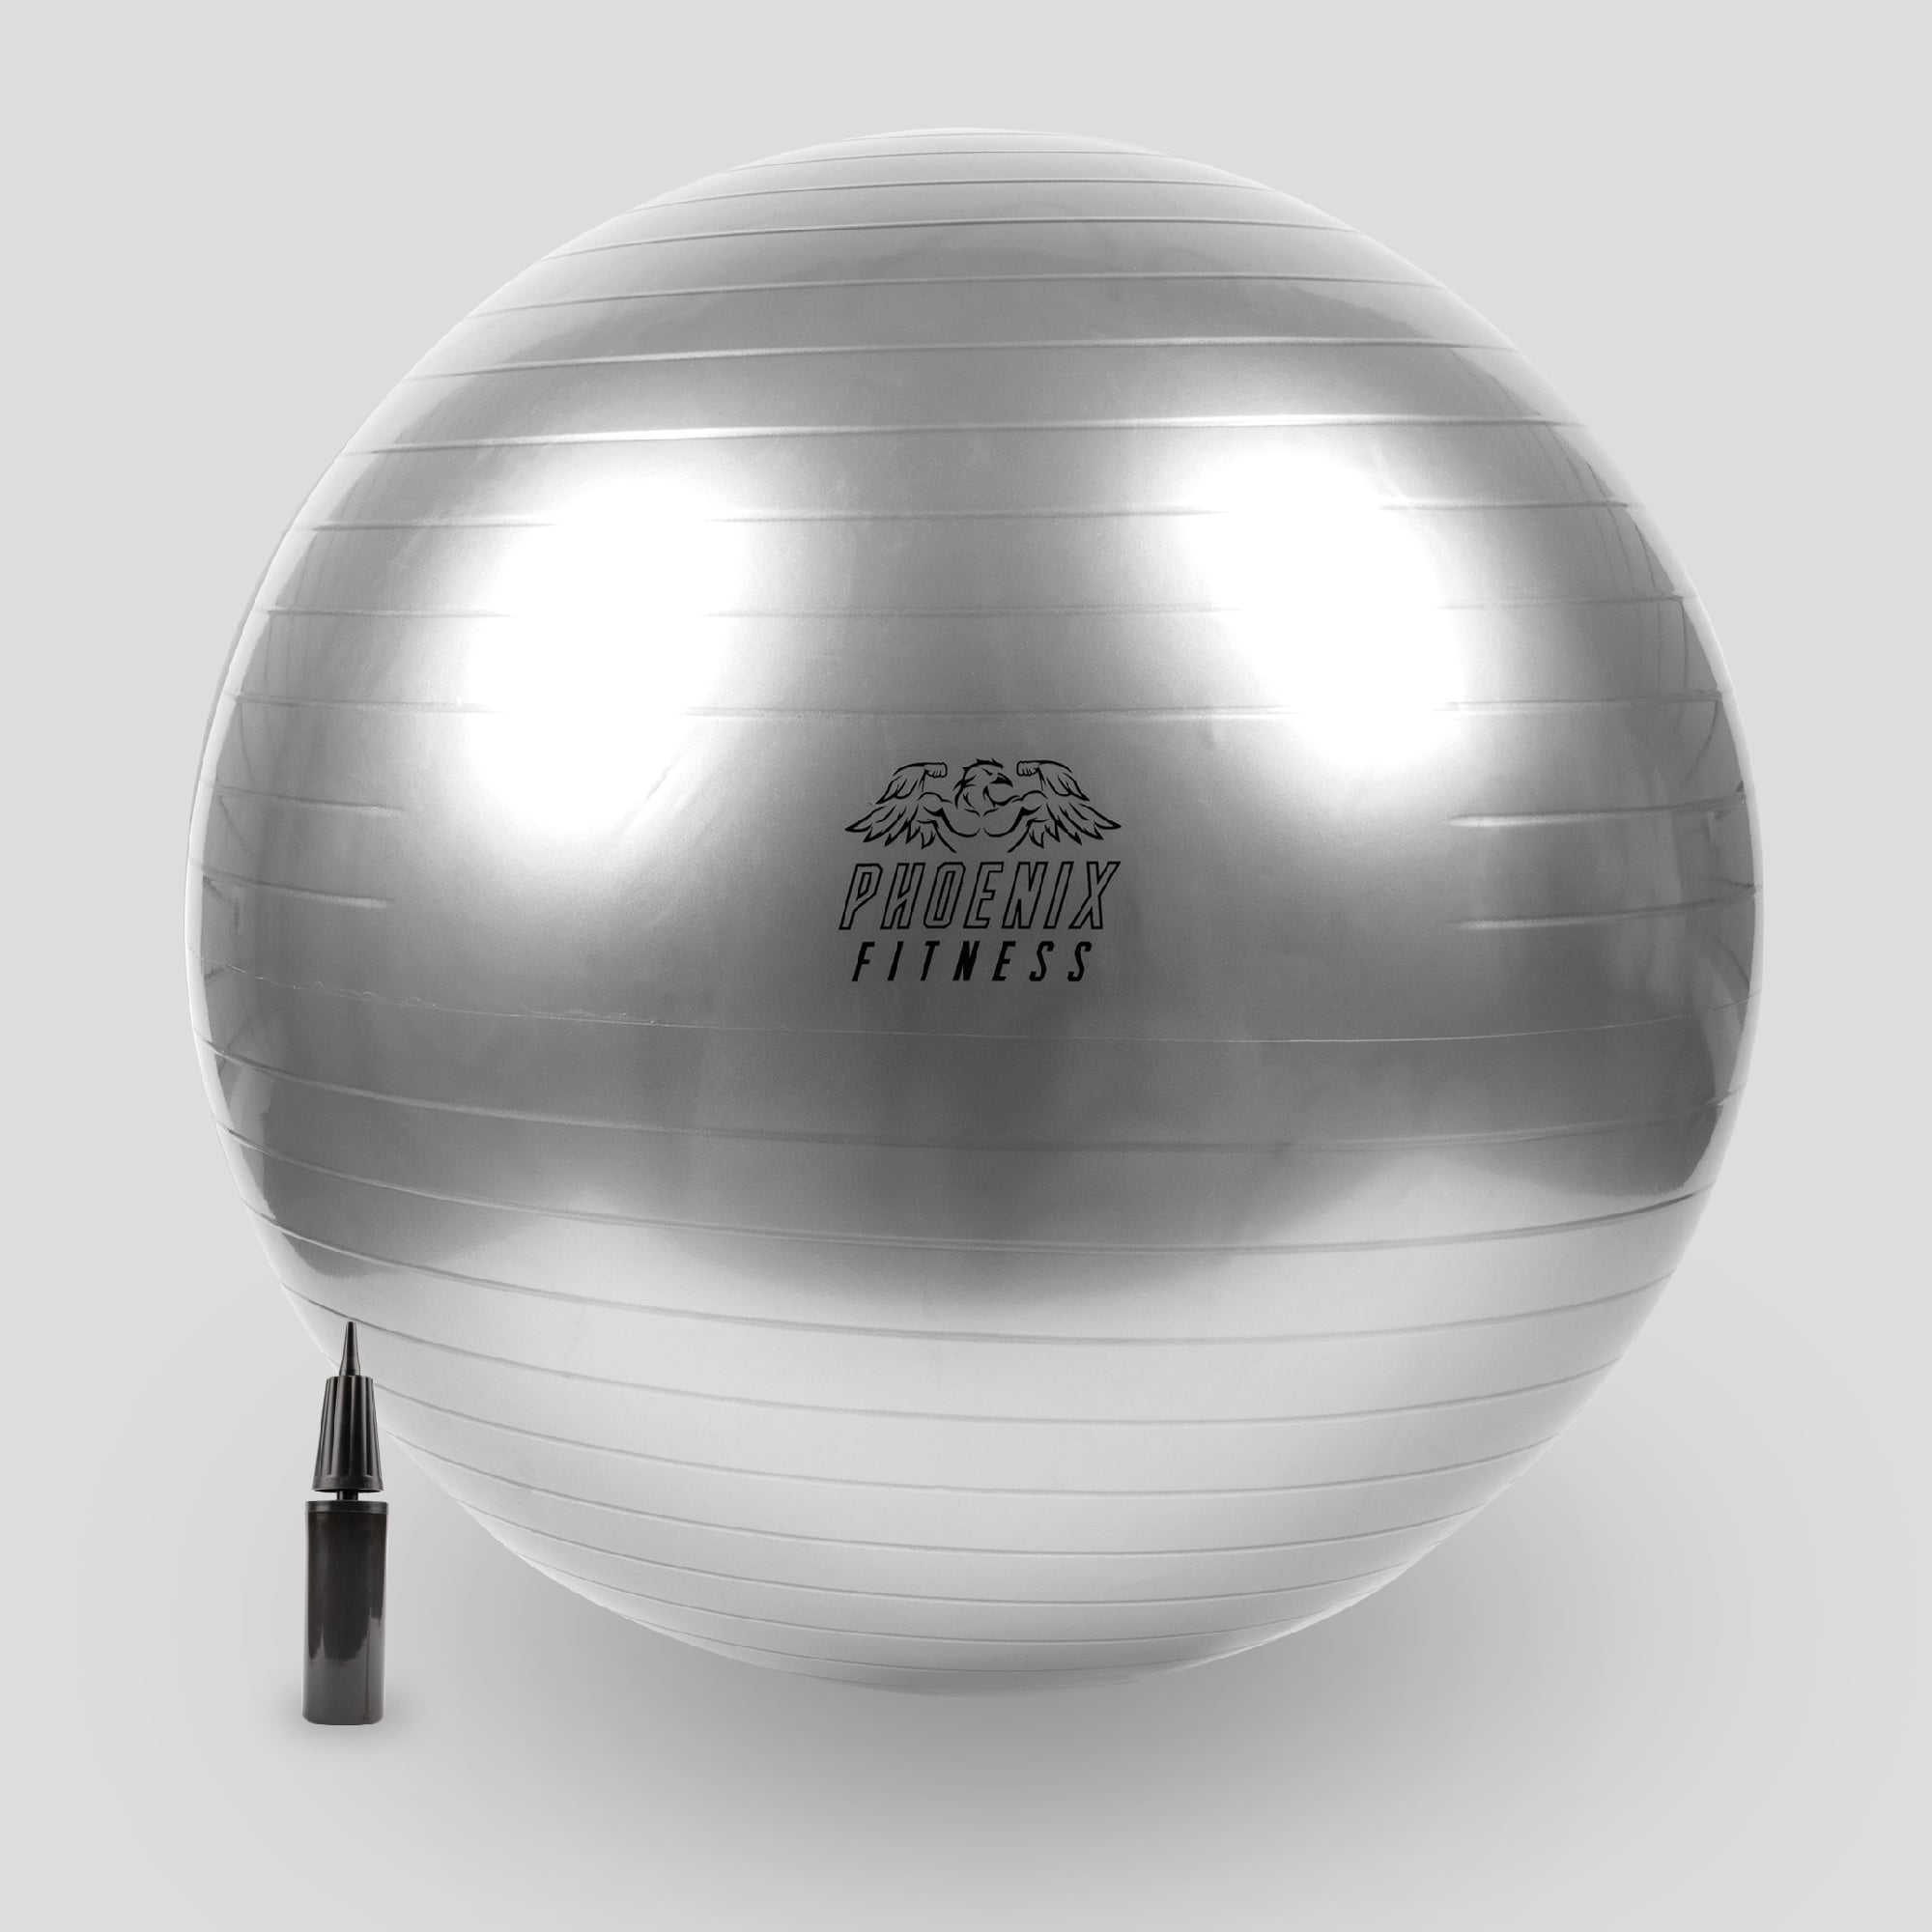 Fit Ball with Pump